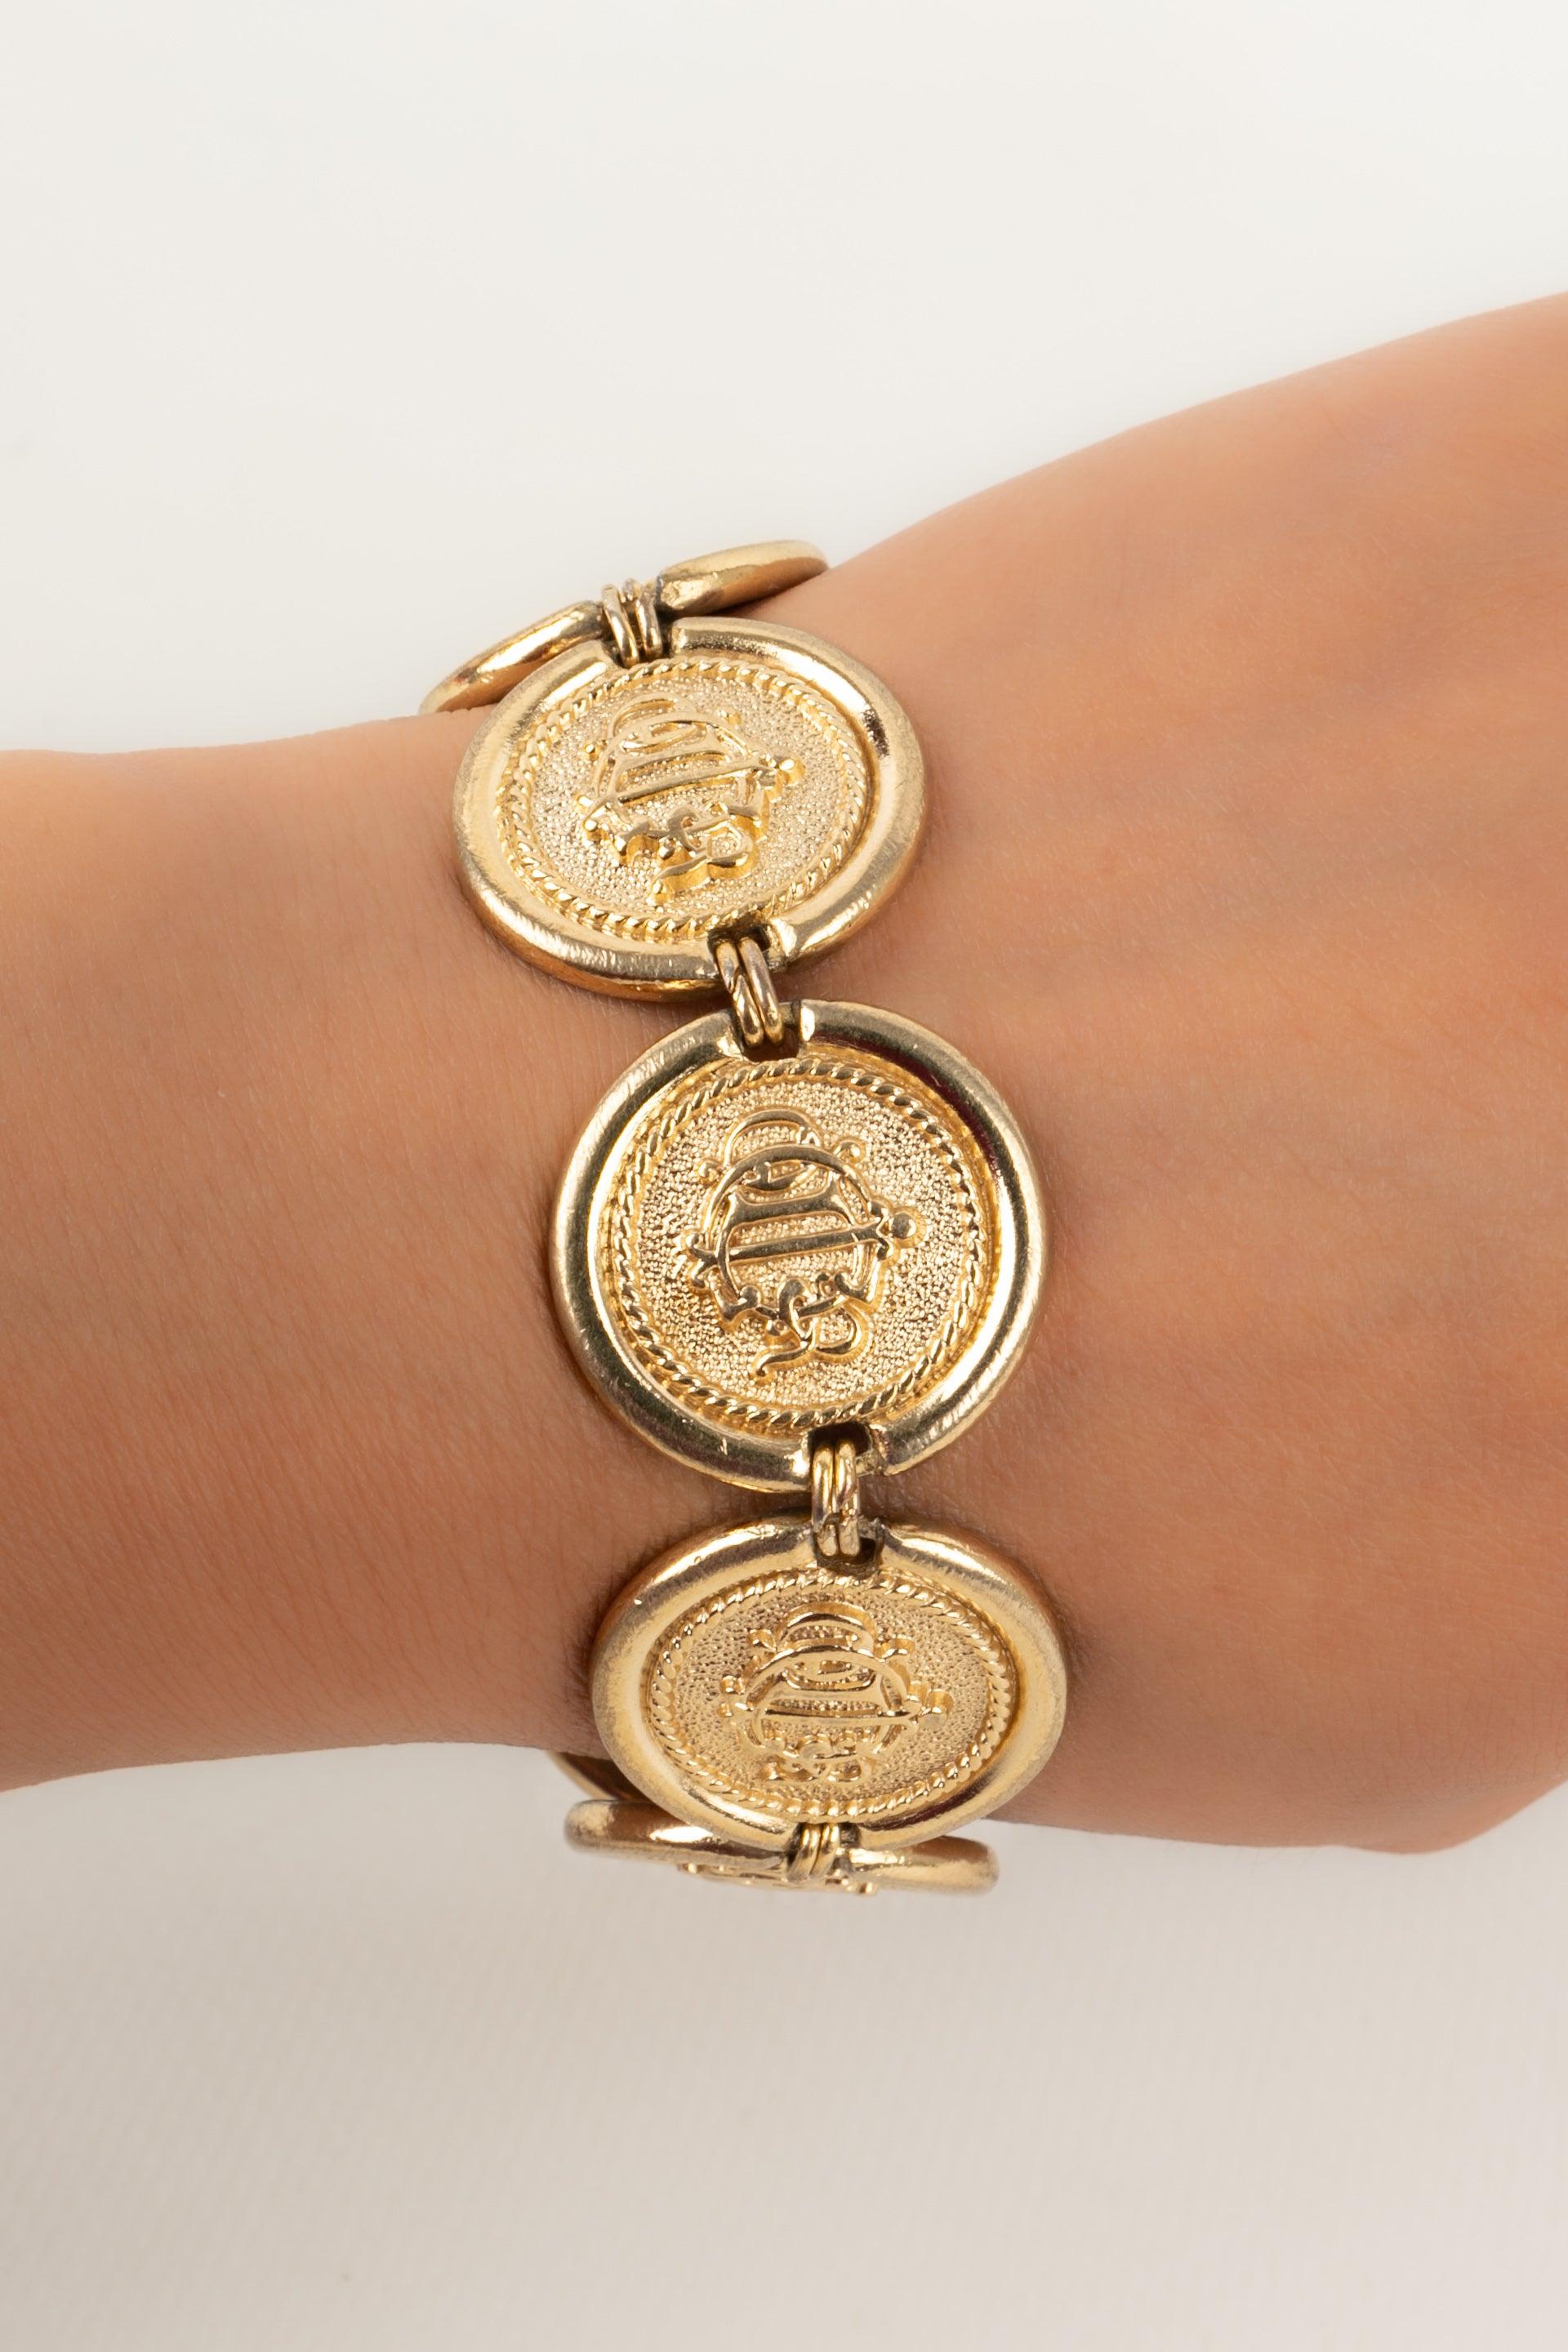 Dior - Golden metal bracelet representing coins.

Additional information:
Condition: Good condition
Dimensions: Length: 19 cm

Seller Reference: BRA60